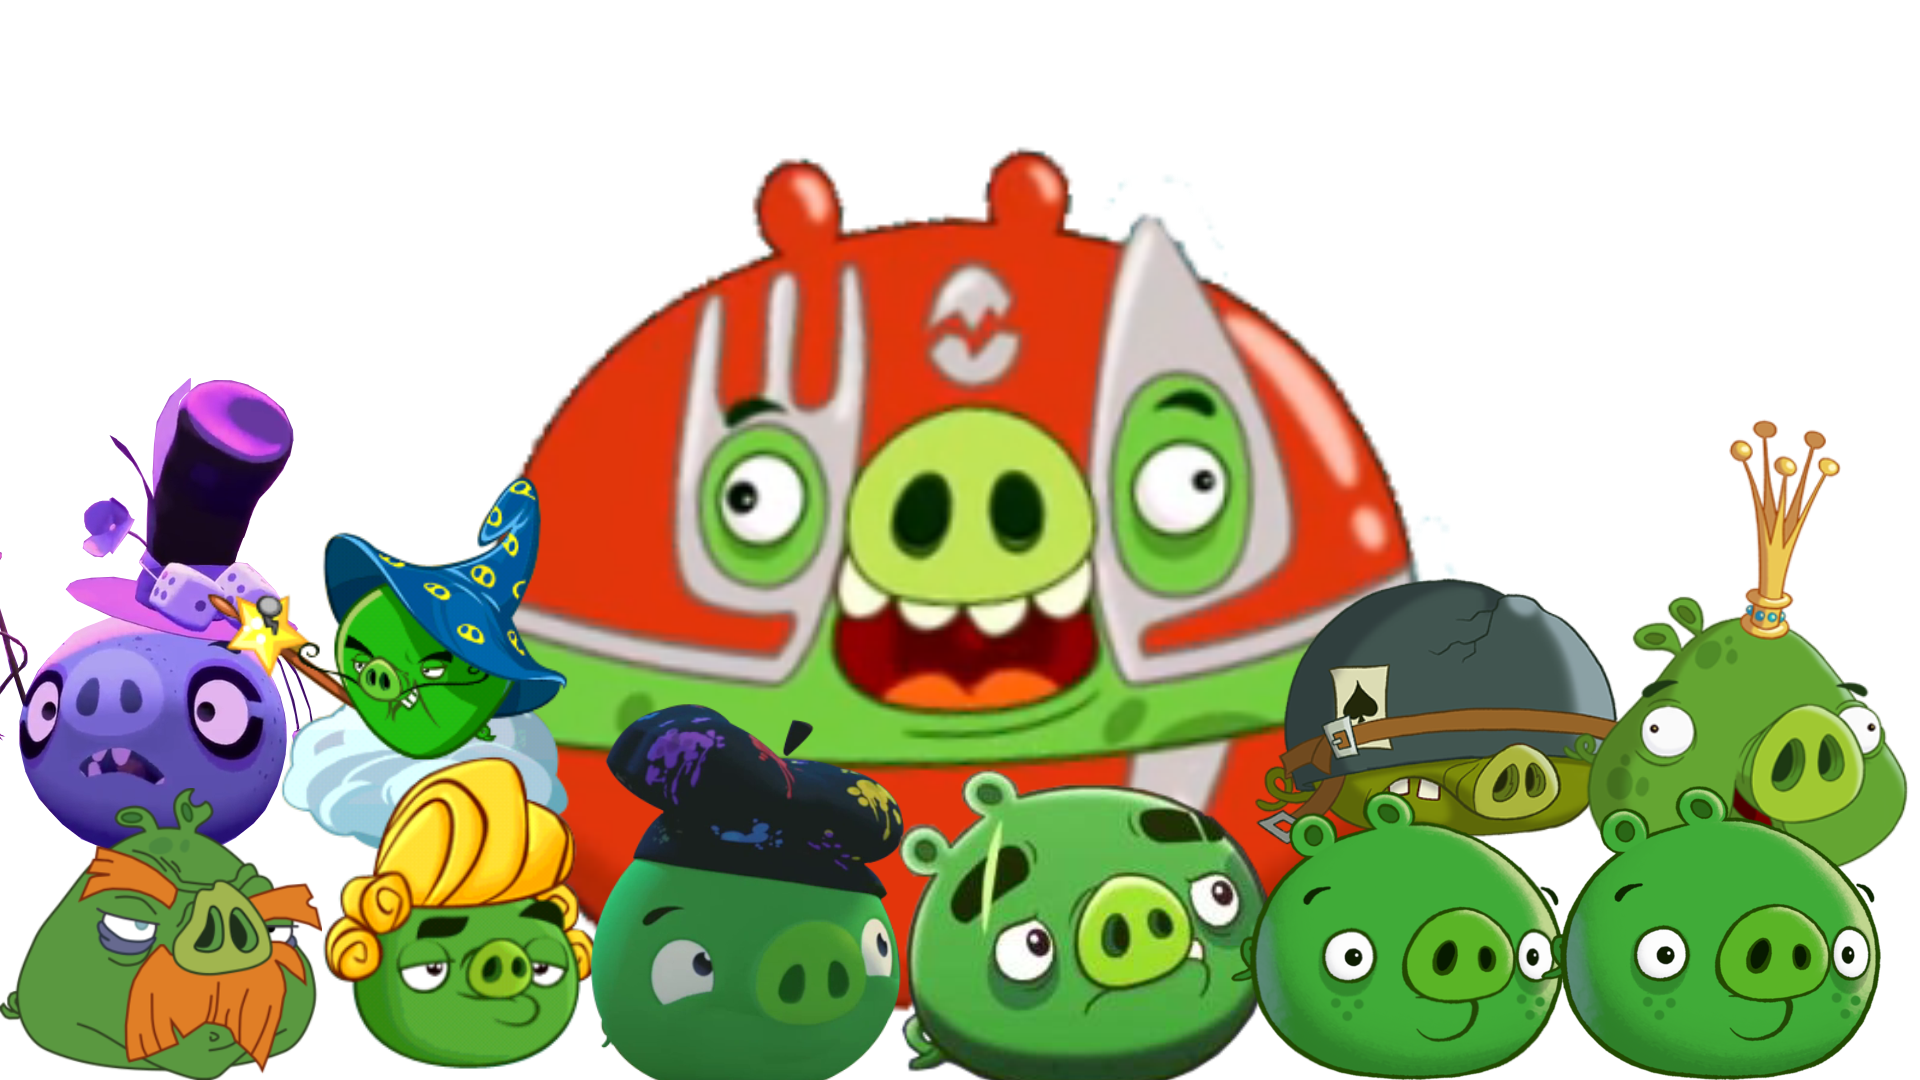 Angry Piggies Space instal the new for apple